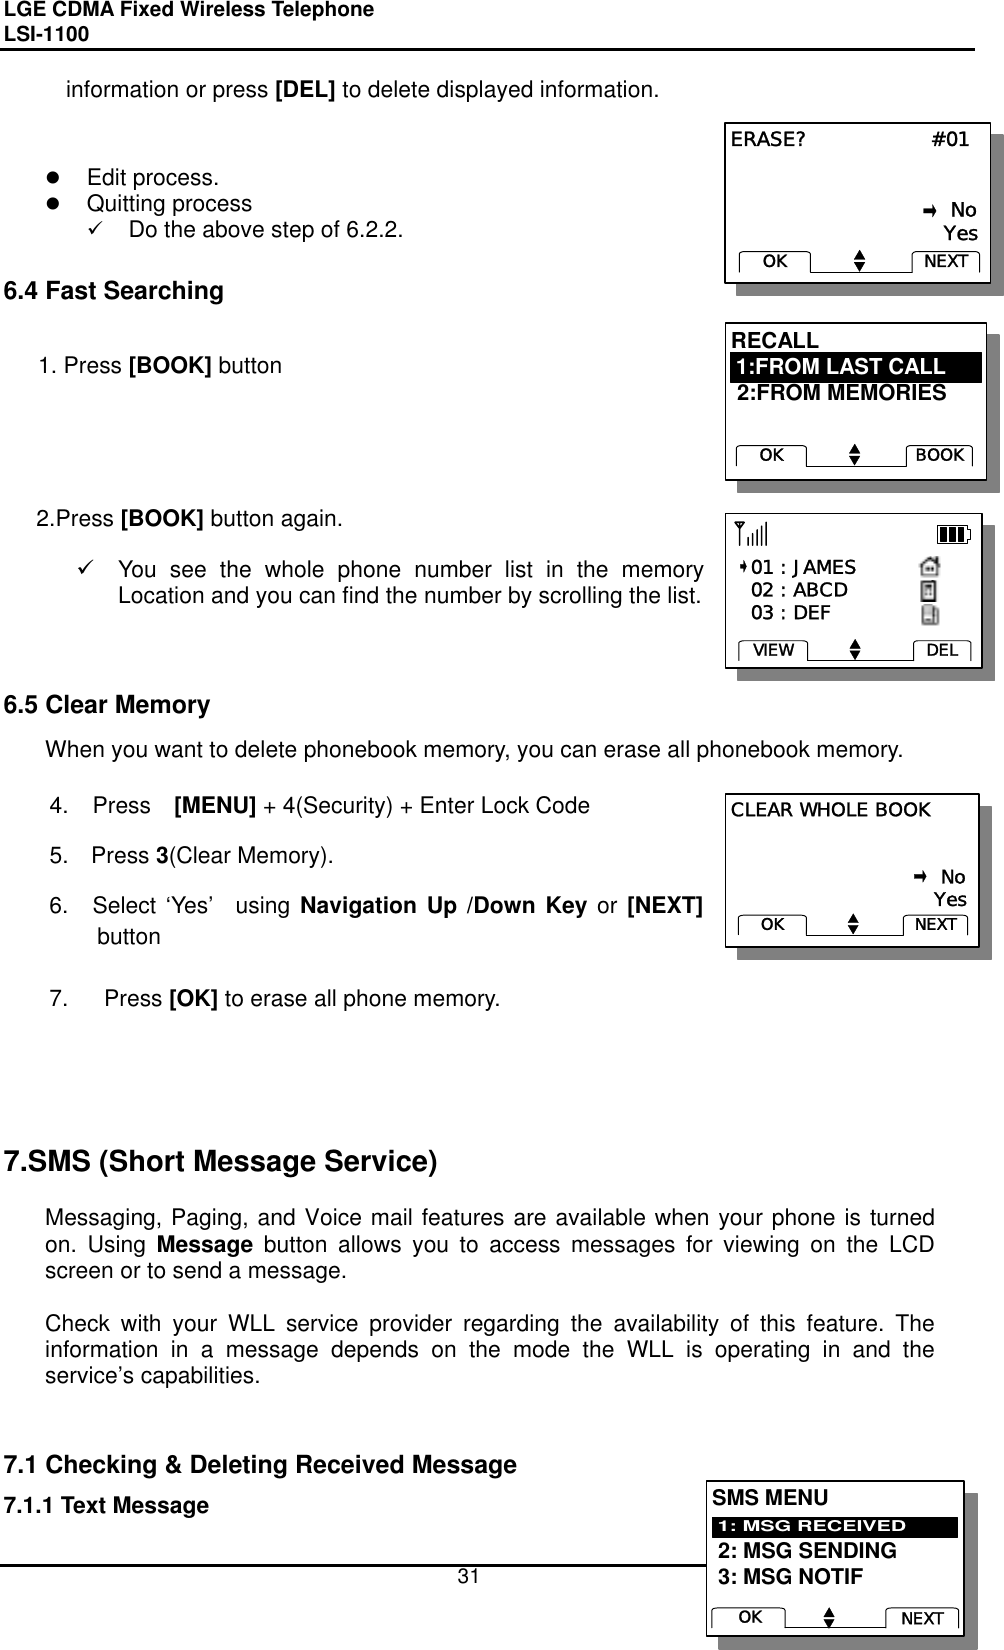 LGE CDMA Fixed Wireless Telephone                                       LSI-1100    31 RECALL  2:FROM MEMORIESBOOKOK1:FROM LAST CALLRECALL  2:FROM MEMORIESBOOKOK1:FROM LAST CALLCLEAR WHOLE BOOK                                                            No                               YesNEXTOKCLEAR WHOLE BOOK                                                            No                               YesNEXTOKERASE?                  #01                                                            No                               YesNEXTOKERASE?                  #01                                                            No                               YesNEXTOKinformation or press [DEL] to delete displayed information.          Edit process.   Quitting process   Do the above step of 6.2.2.  6.4 Fast Searching    1. Press [BOOK] button      2.Press [BOOK] button again.    You see the whole phone number list in the memory Location and you can find the number by scrolling the list.        6.5 Clear Memory When you want to delete phonebook memory, you can erase all phonebook memory.  4. Press  [MENU] + 4(Security) + Enter Lock Code 5. Press 3(Clear Memory). 6.  Select ‘Yes’  using Navigation Up /Down Key or [NEXT] button  7.  Press [OK] to erase all phone memory.      7.SMS (Short Message Service)  Messaging, Paging, and Voice mail features are available when your phone is turned on. Using Message button allows you to access messages for viewing on the LCD screen or to send a message.    Check with your WLL service provider regarding the availability of this feature. The information in a message depends on the mode the WLL is operating in and the service’s capabilities.   7.1 Checking &amp; Deleting Received Message 7.1.1 Text Message    01 : JAMES   02 : ABCD   03 : DEFDELVIEW   01 : JAMES   02 : ABCD   03 : DEFDELVIEWSMS MENU 2: MSG SENDING 3: MSG NOTIF1: MSG RECEIVEDNEXTOKSMS MENU 2: MSG SENDING 3: MSG NOTIF1: MSG RECEIVEDNEXTOK